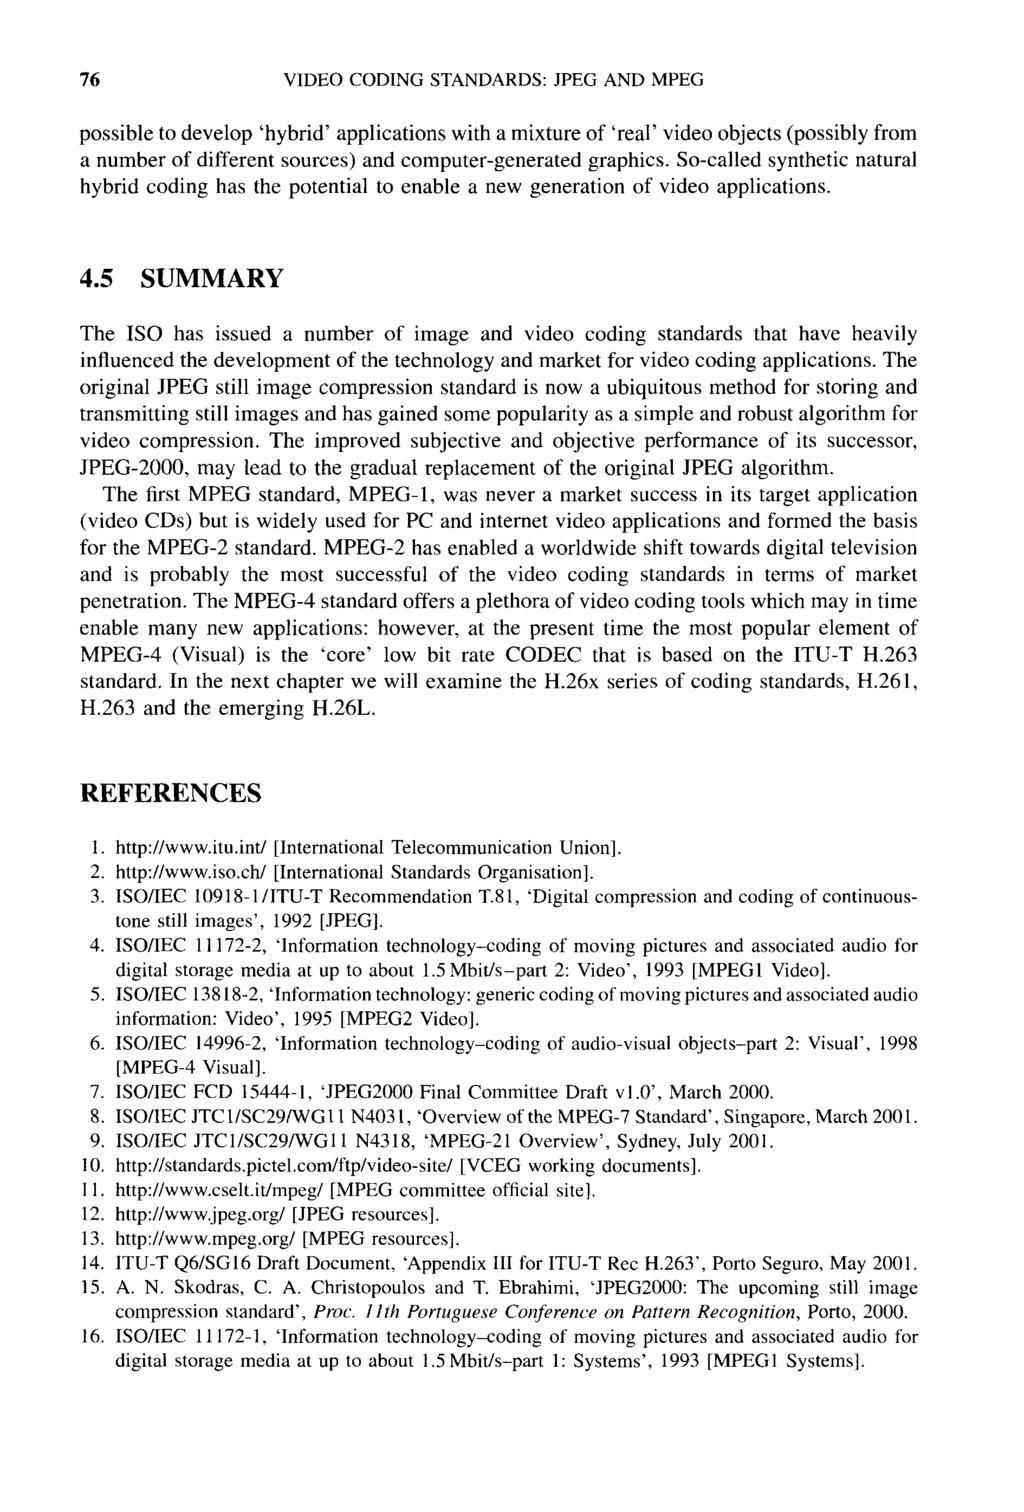 76 VIDEO CODING STANDARDS: JPEG MPEG possible to develop hybrid applications with a mixture of real video objects (possibly from a number of different sources) and computer-generated graphics.